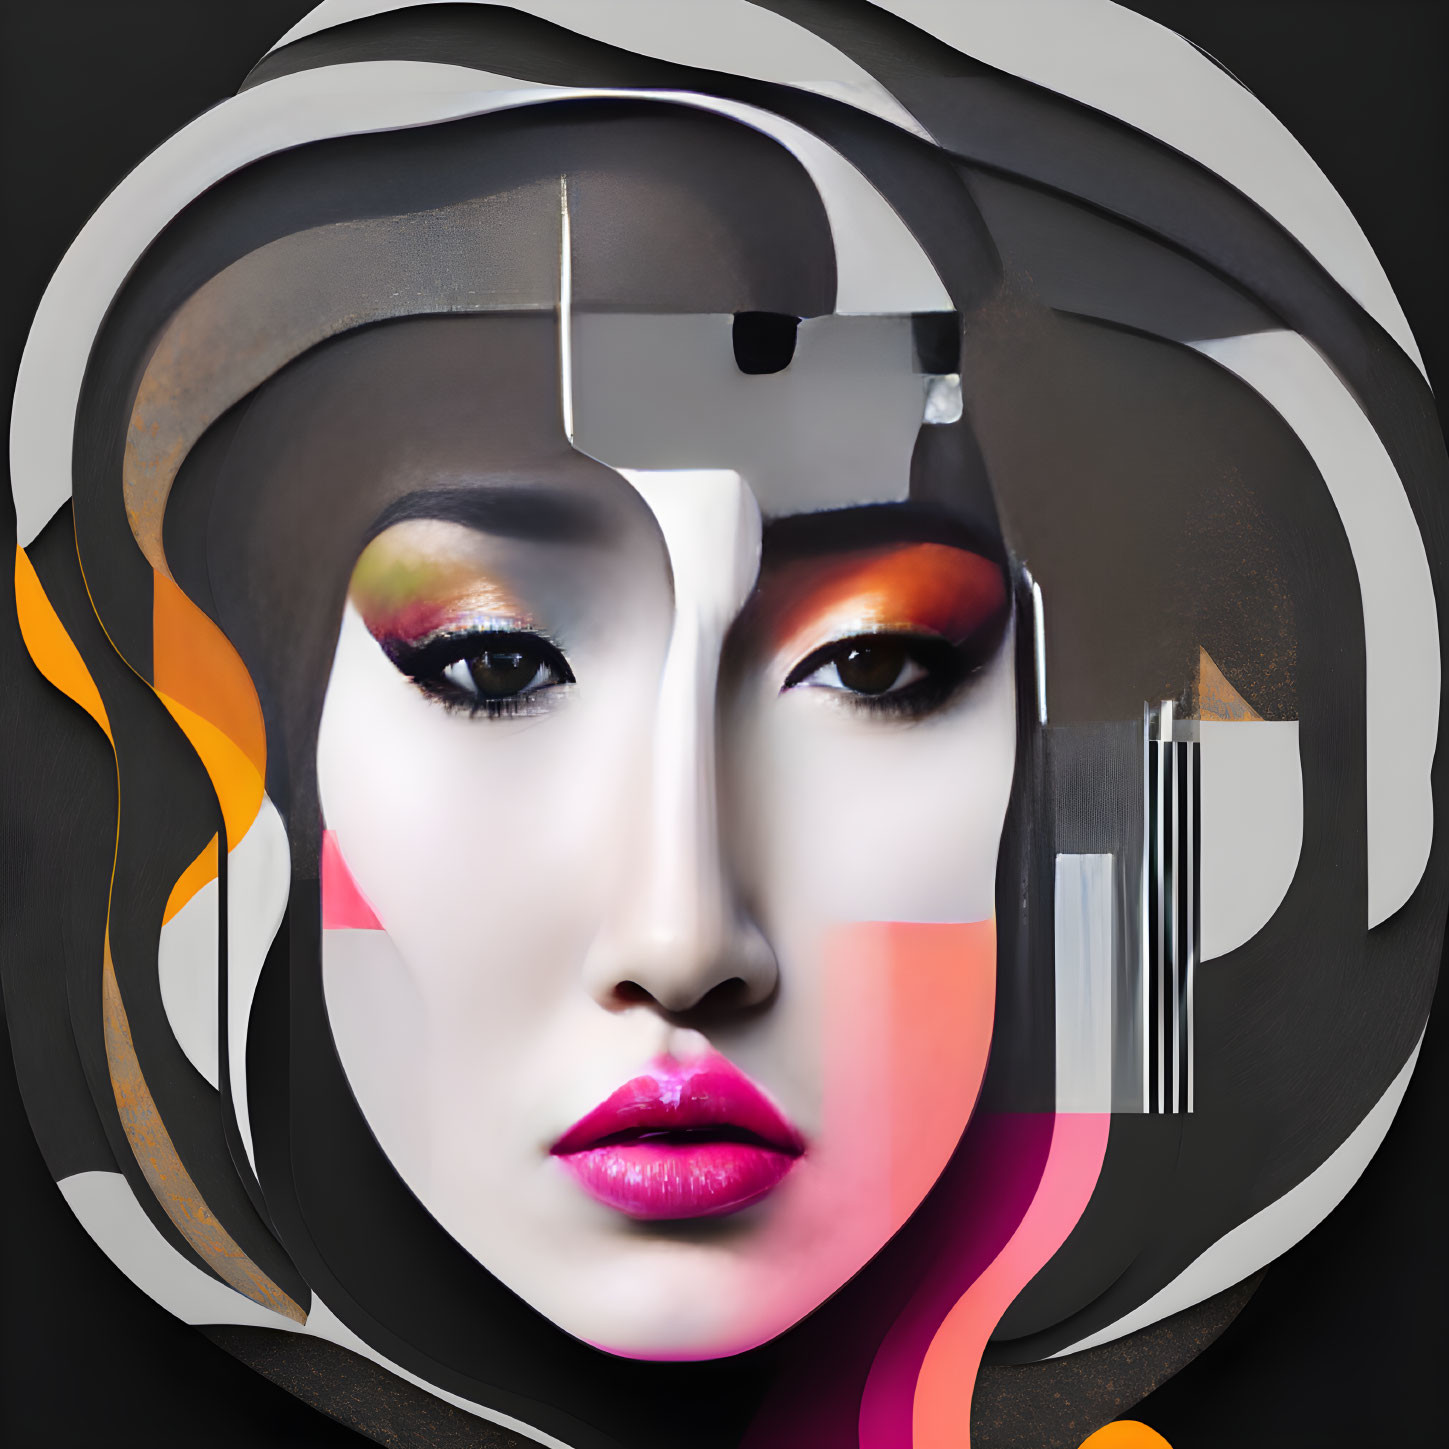 Monochrome and Orange Geometric Abstract Woman's Face Art